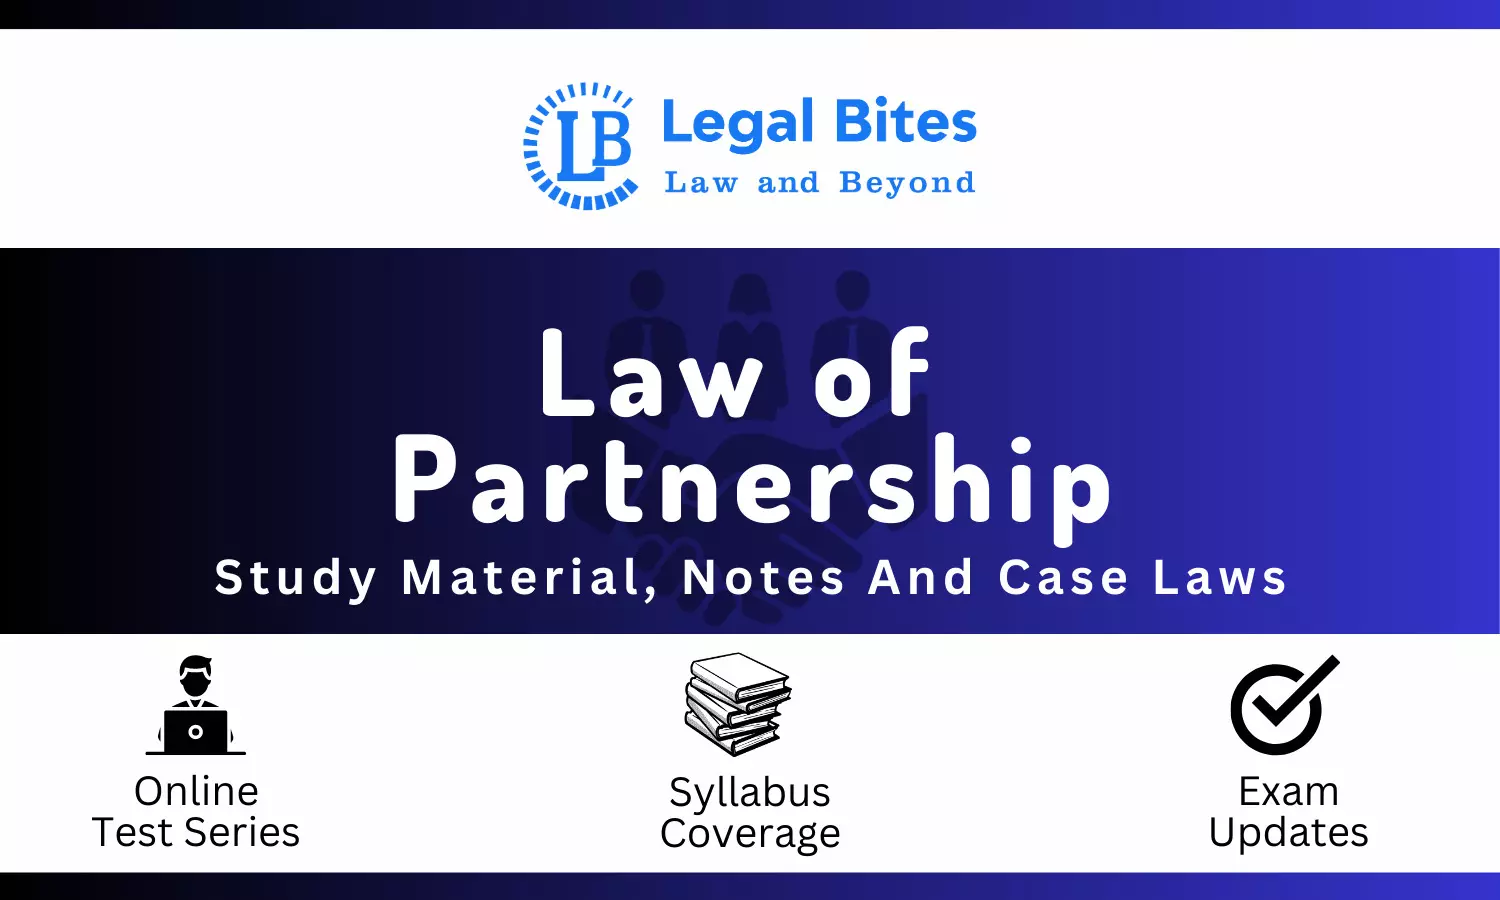 Law of Partnership - Notes, Case Laws And Study Material